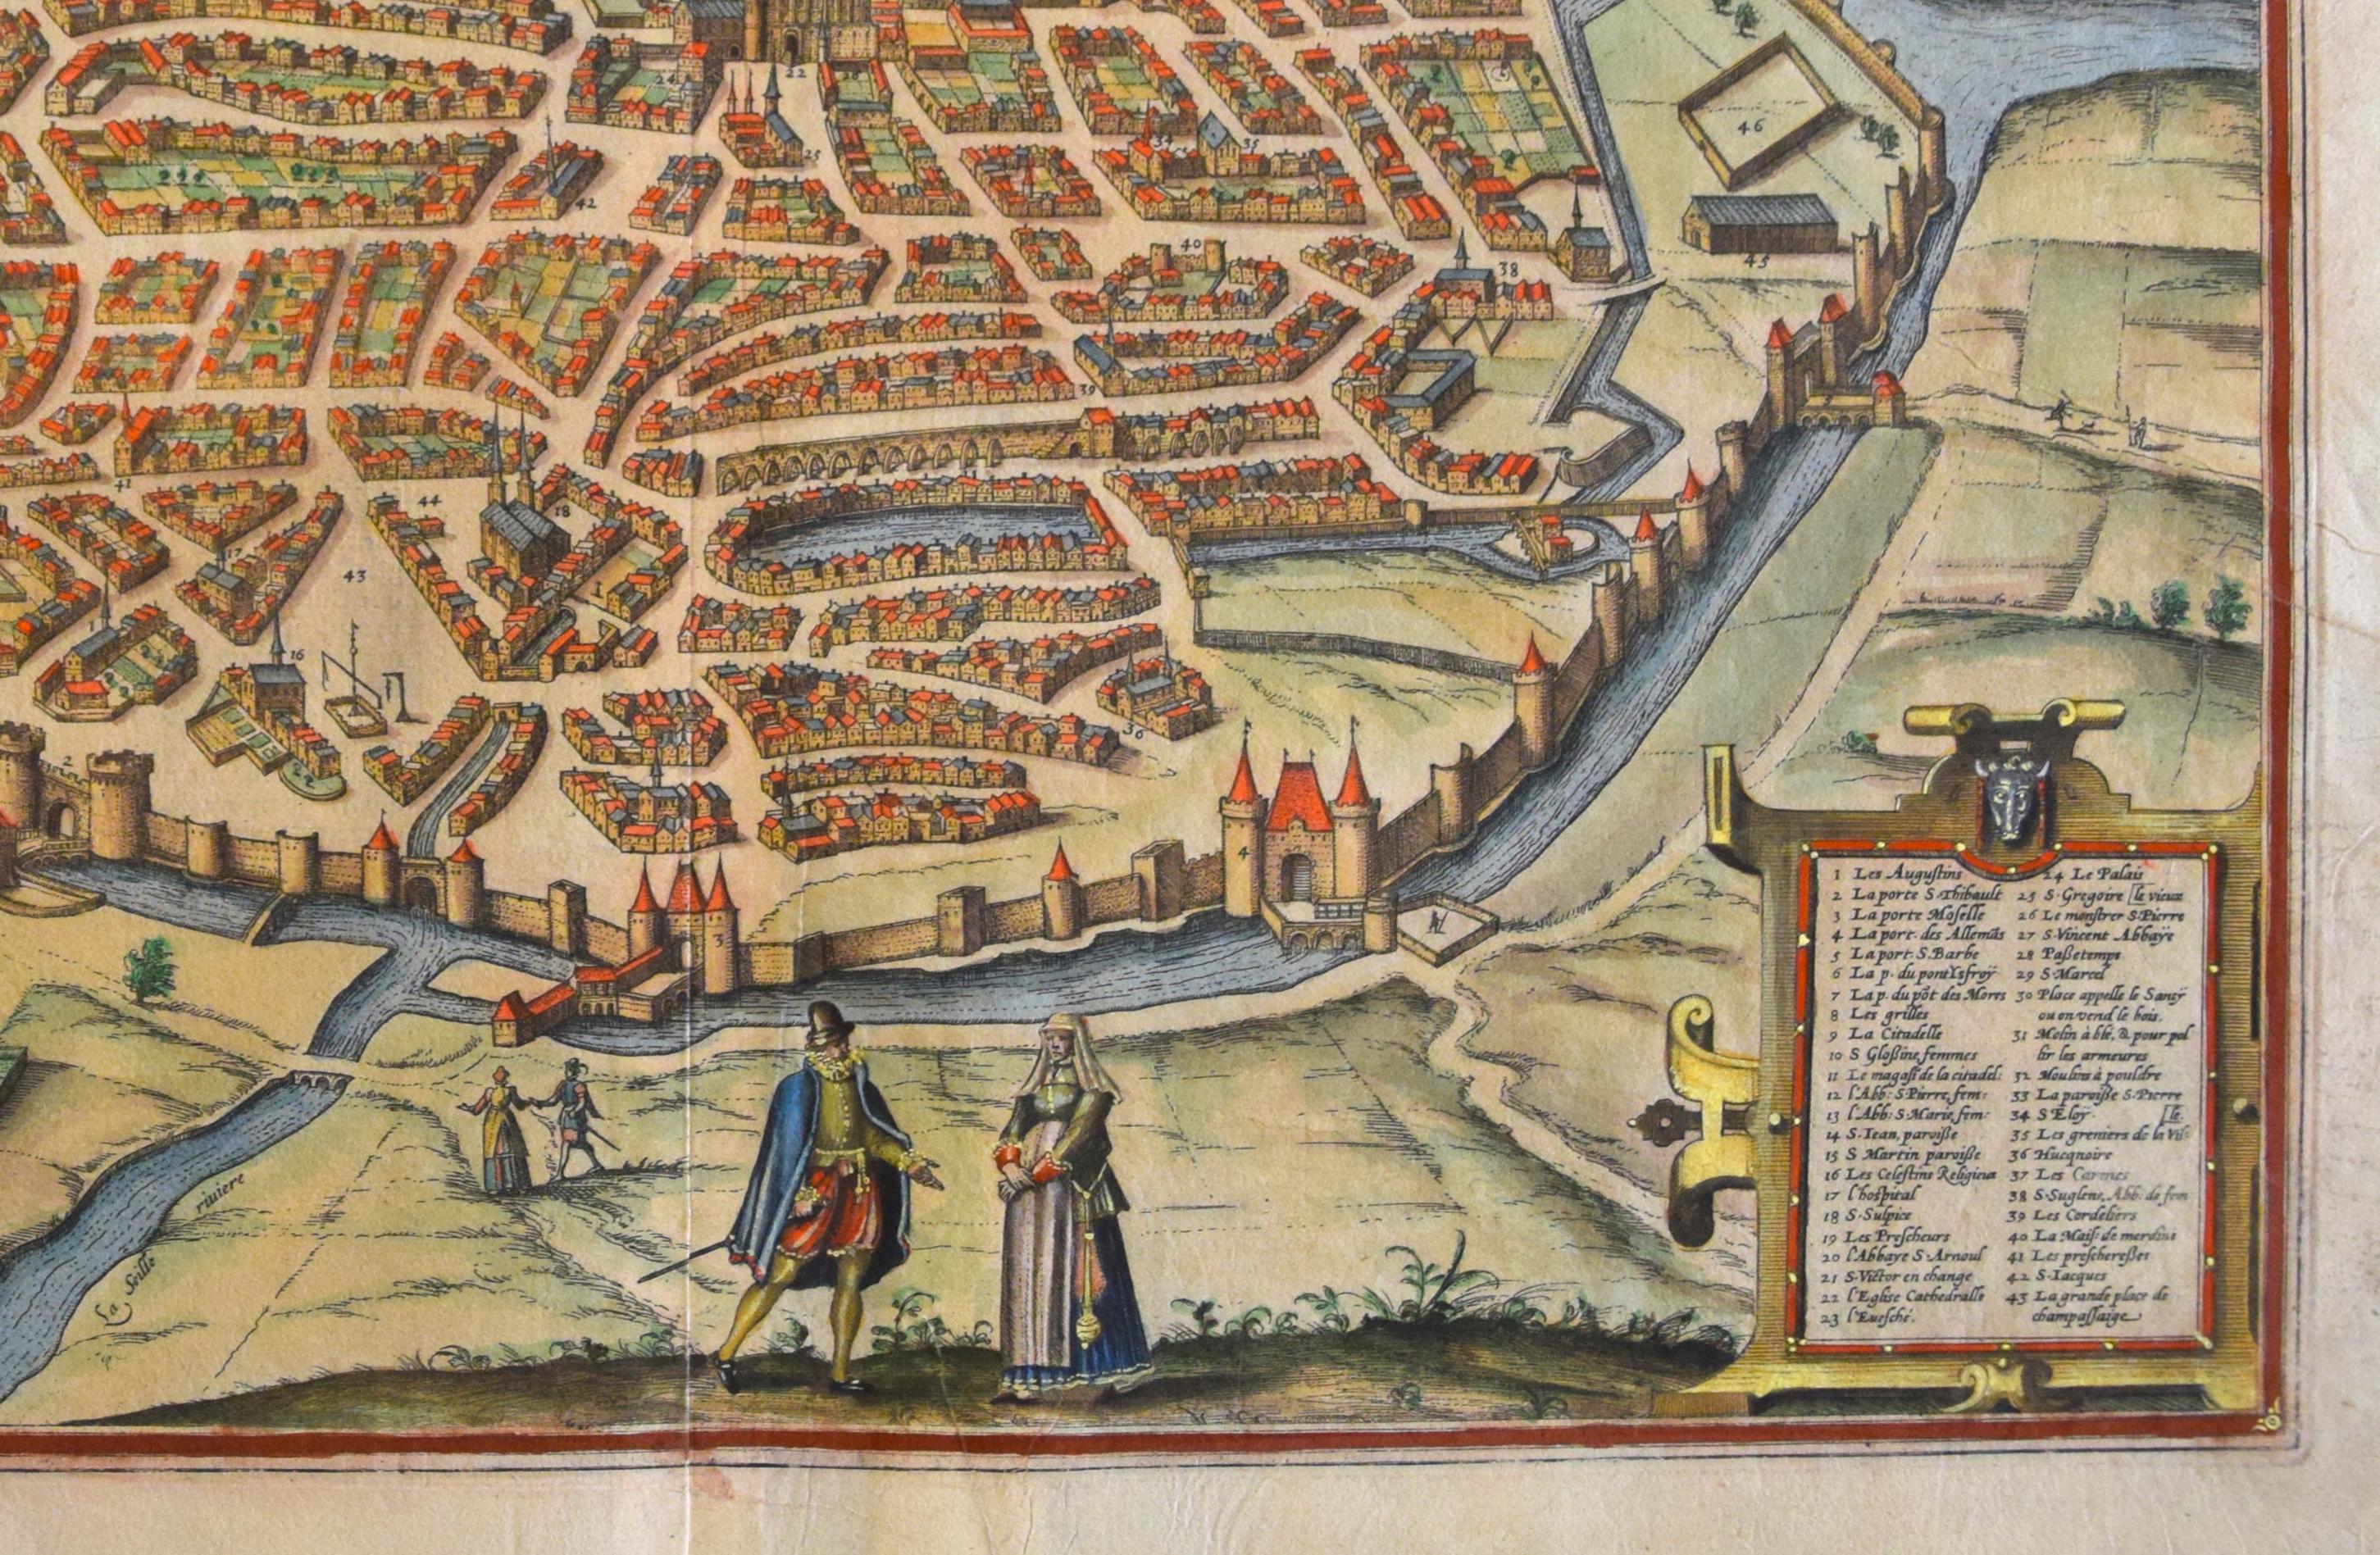 Metz, Antique Map from 